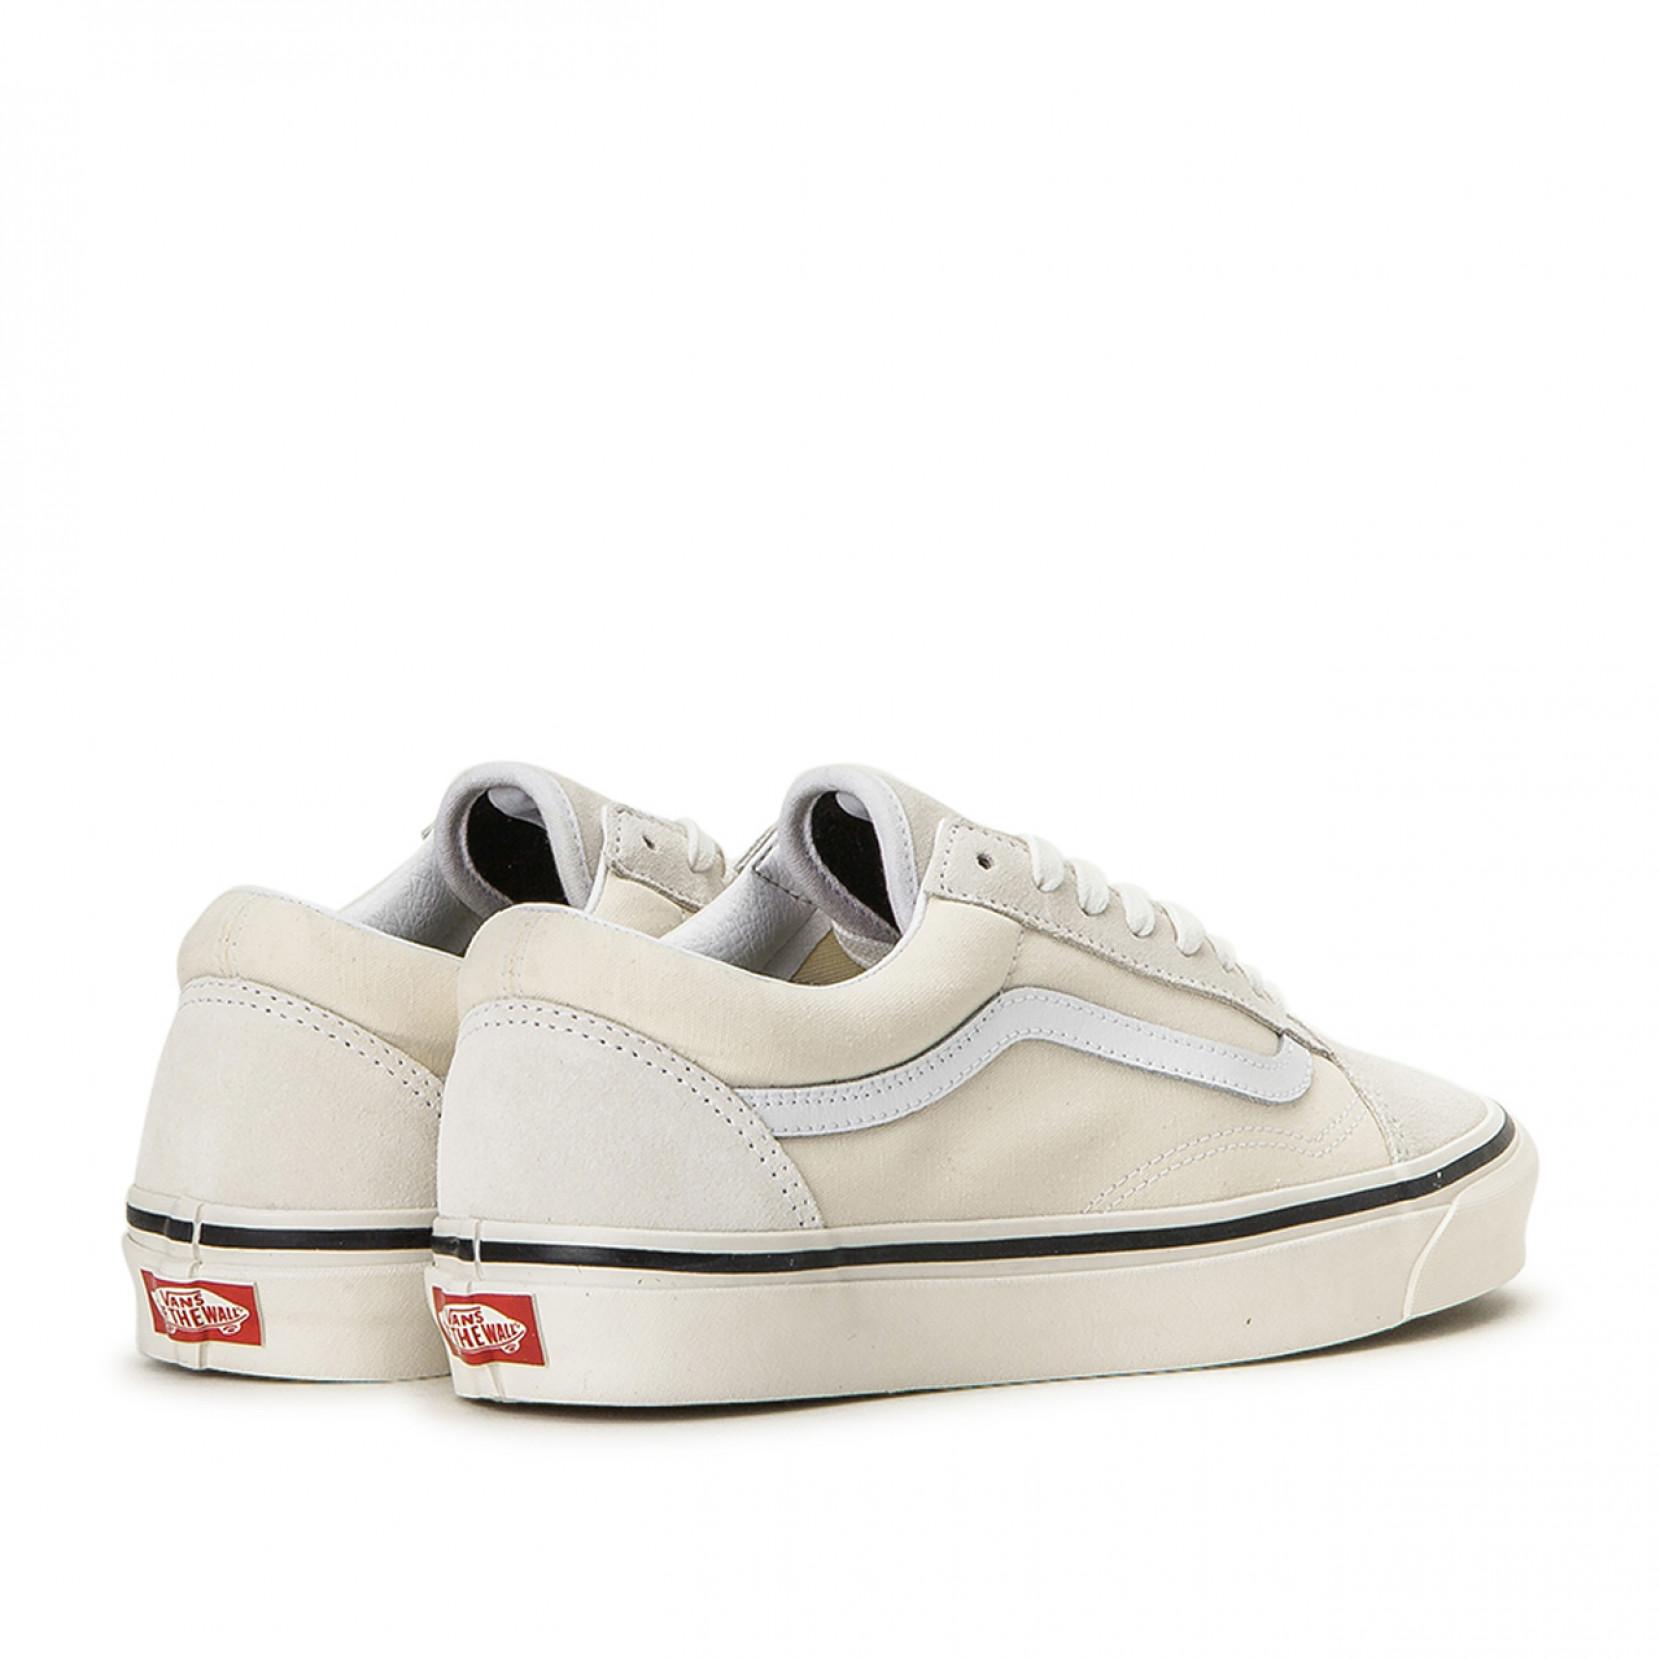 Vans Rubber Anaheim Old Skool 36 Dx Trainers in White - Save 34 